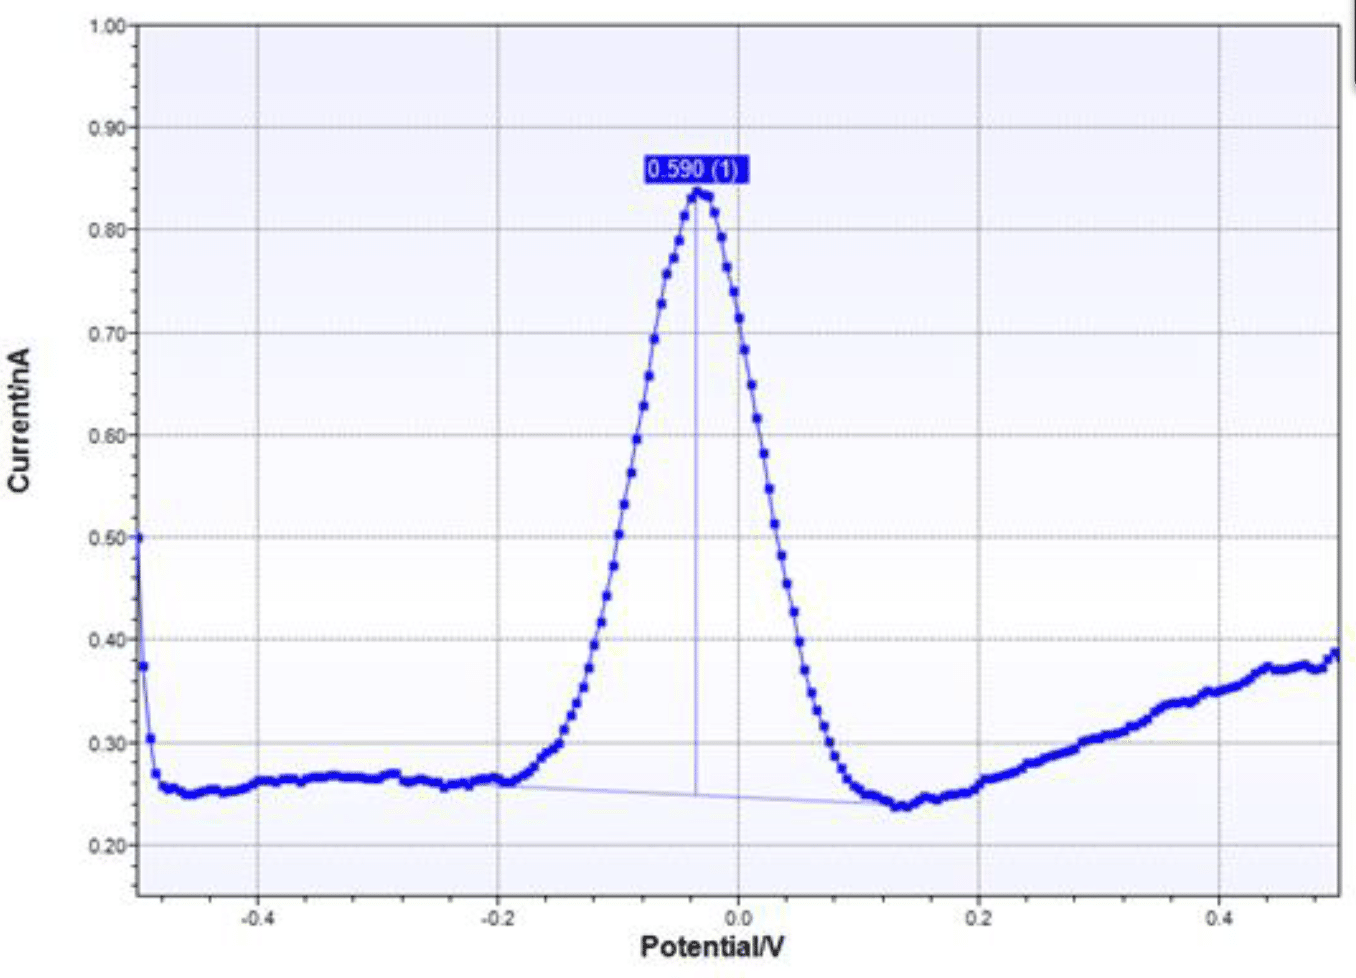 Typical Differential Pulse Voltammetry plot